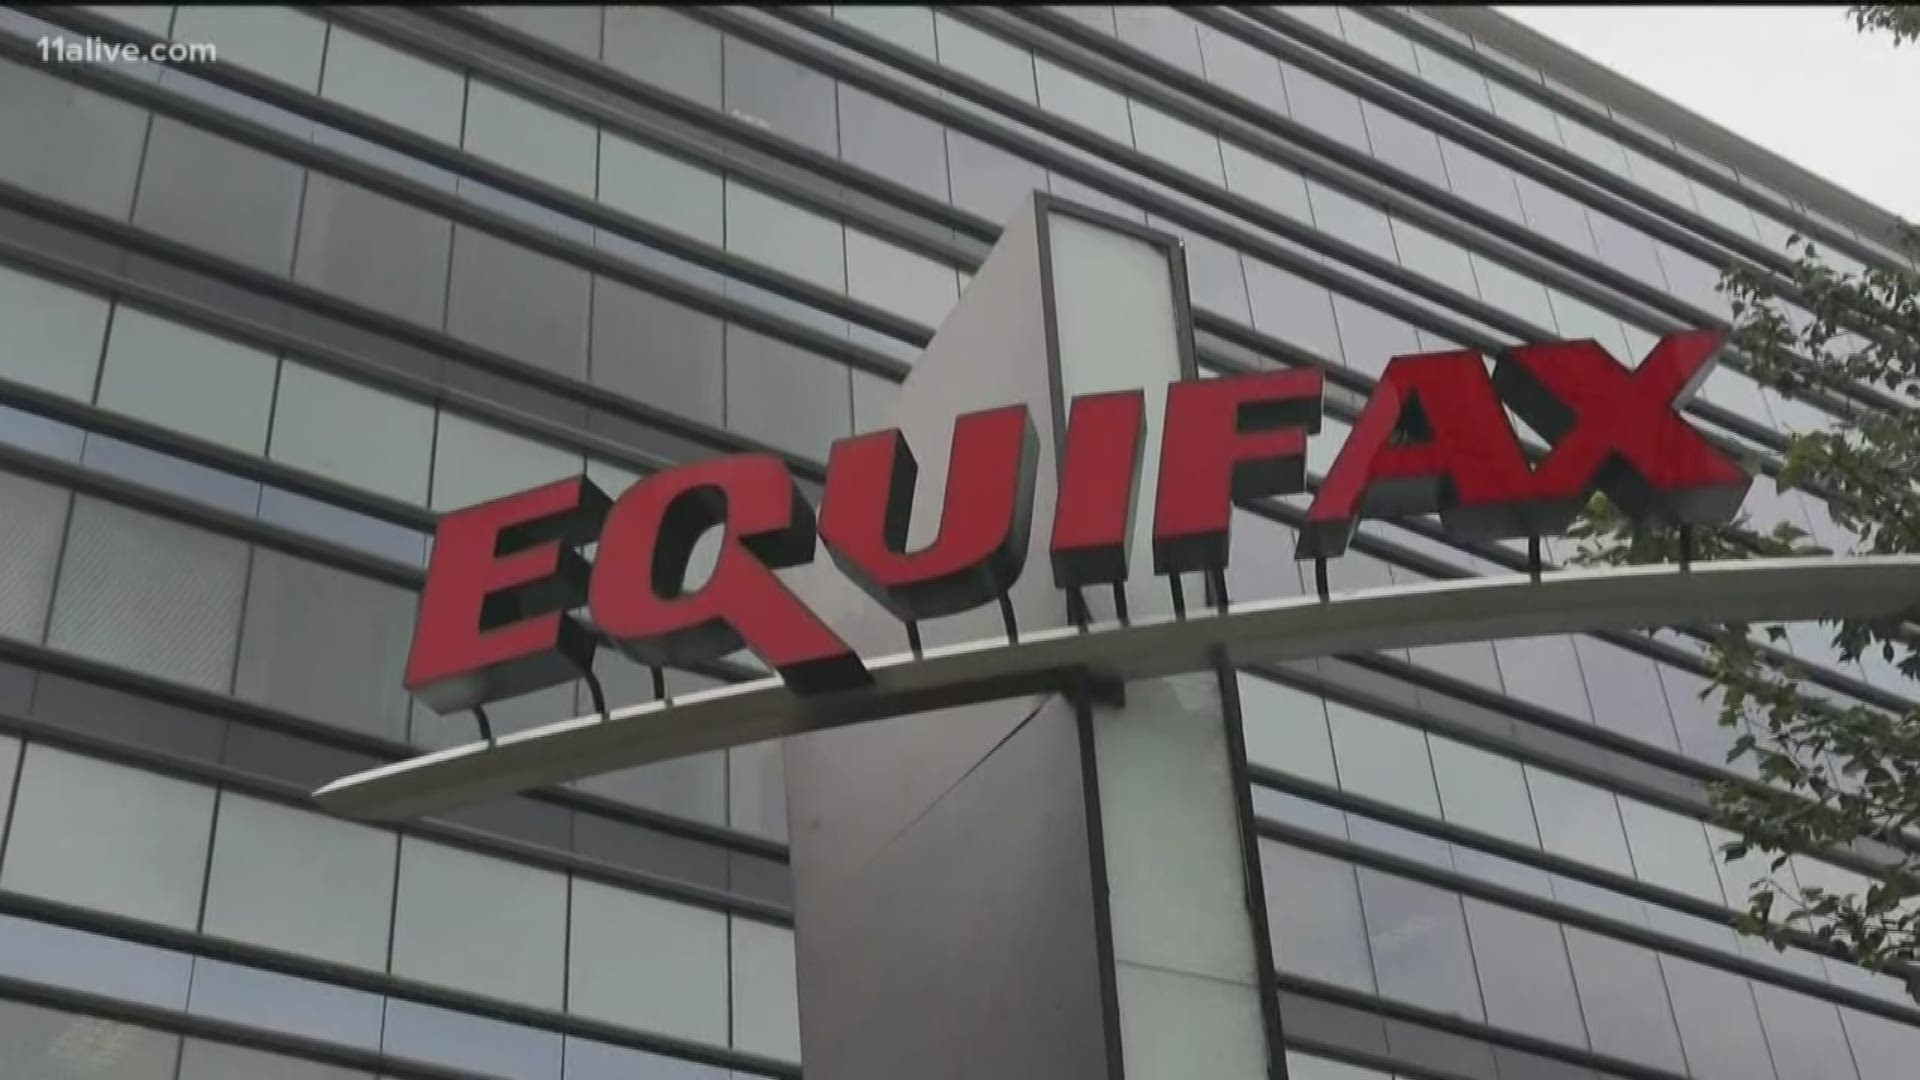 A class action settlement between the FTC and Equifax was announced Monday, and will provide for up to $425 million in payments to consumers who were affected by the breach.